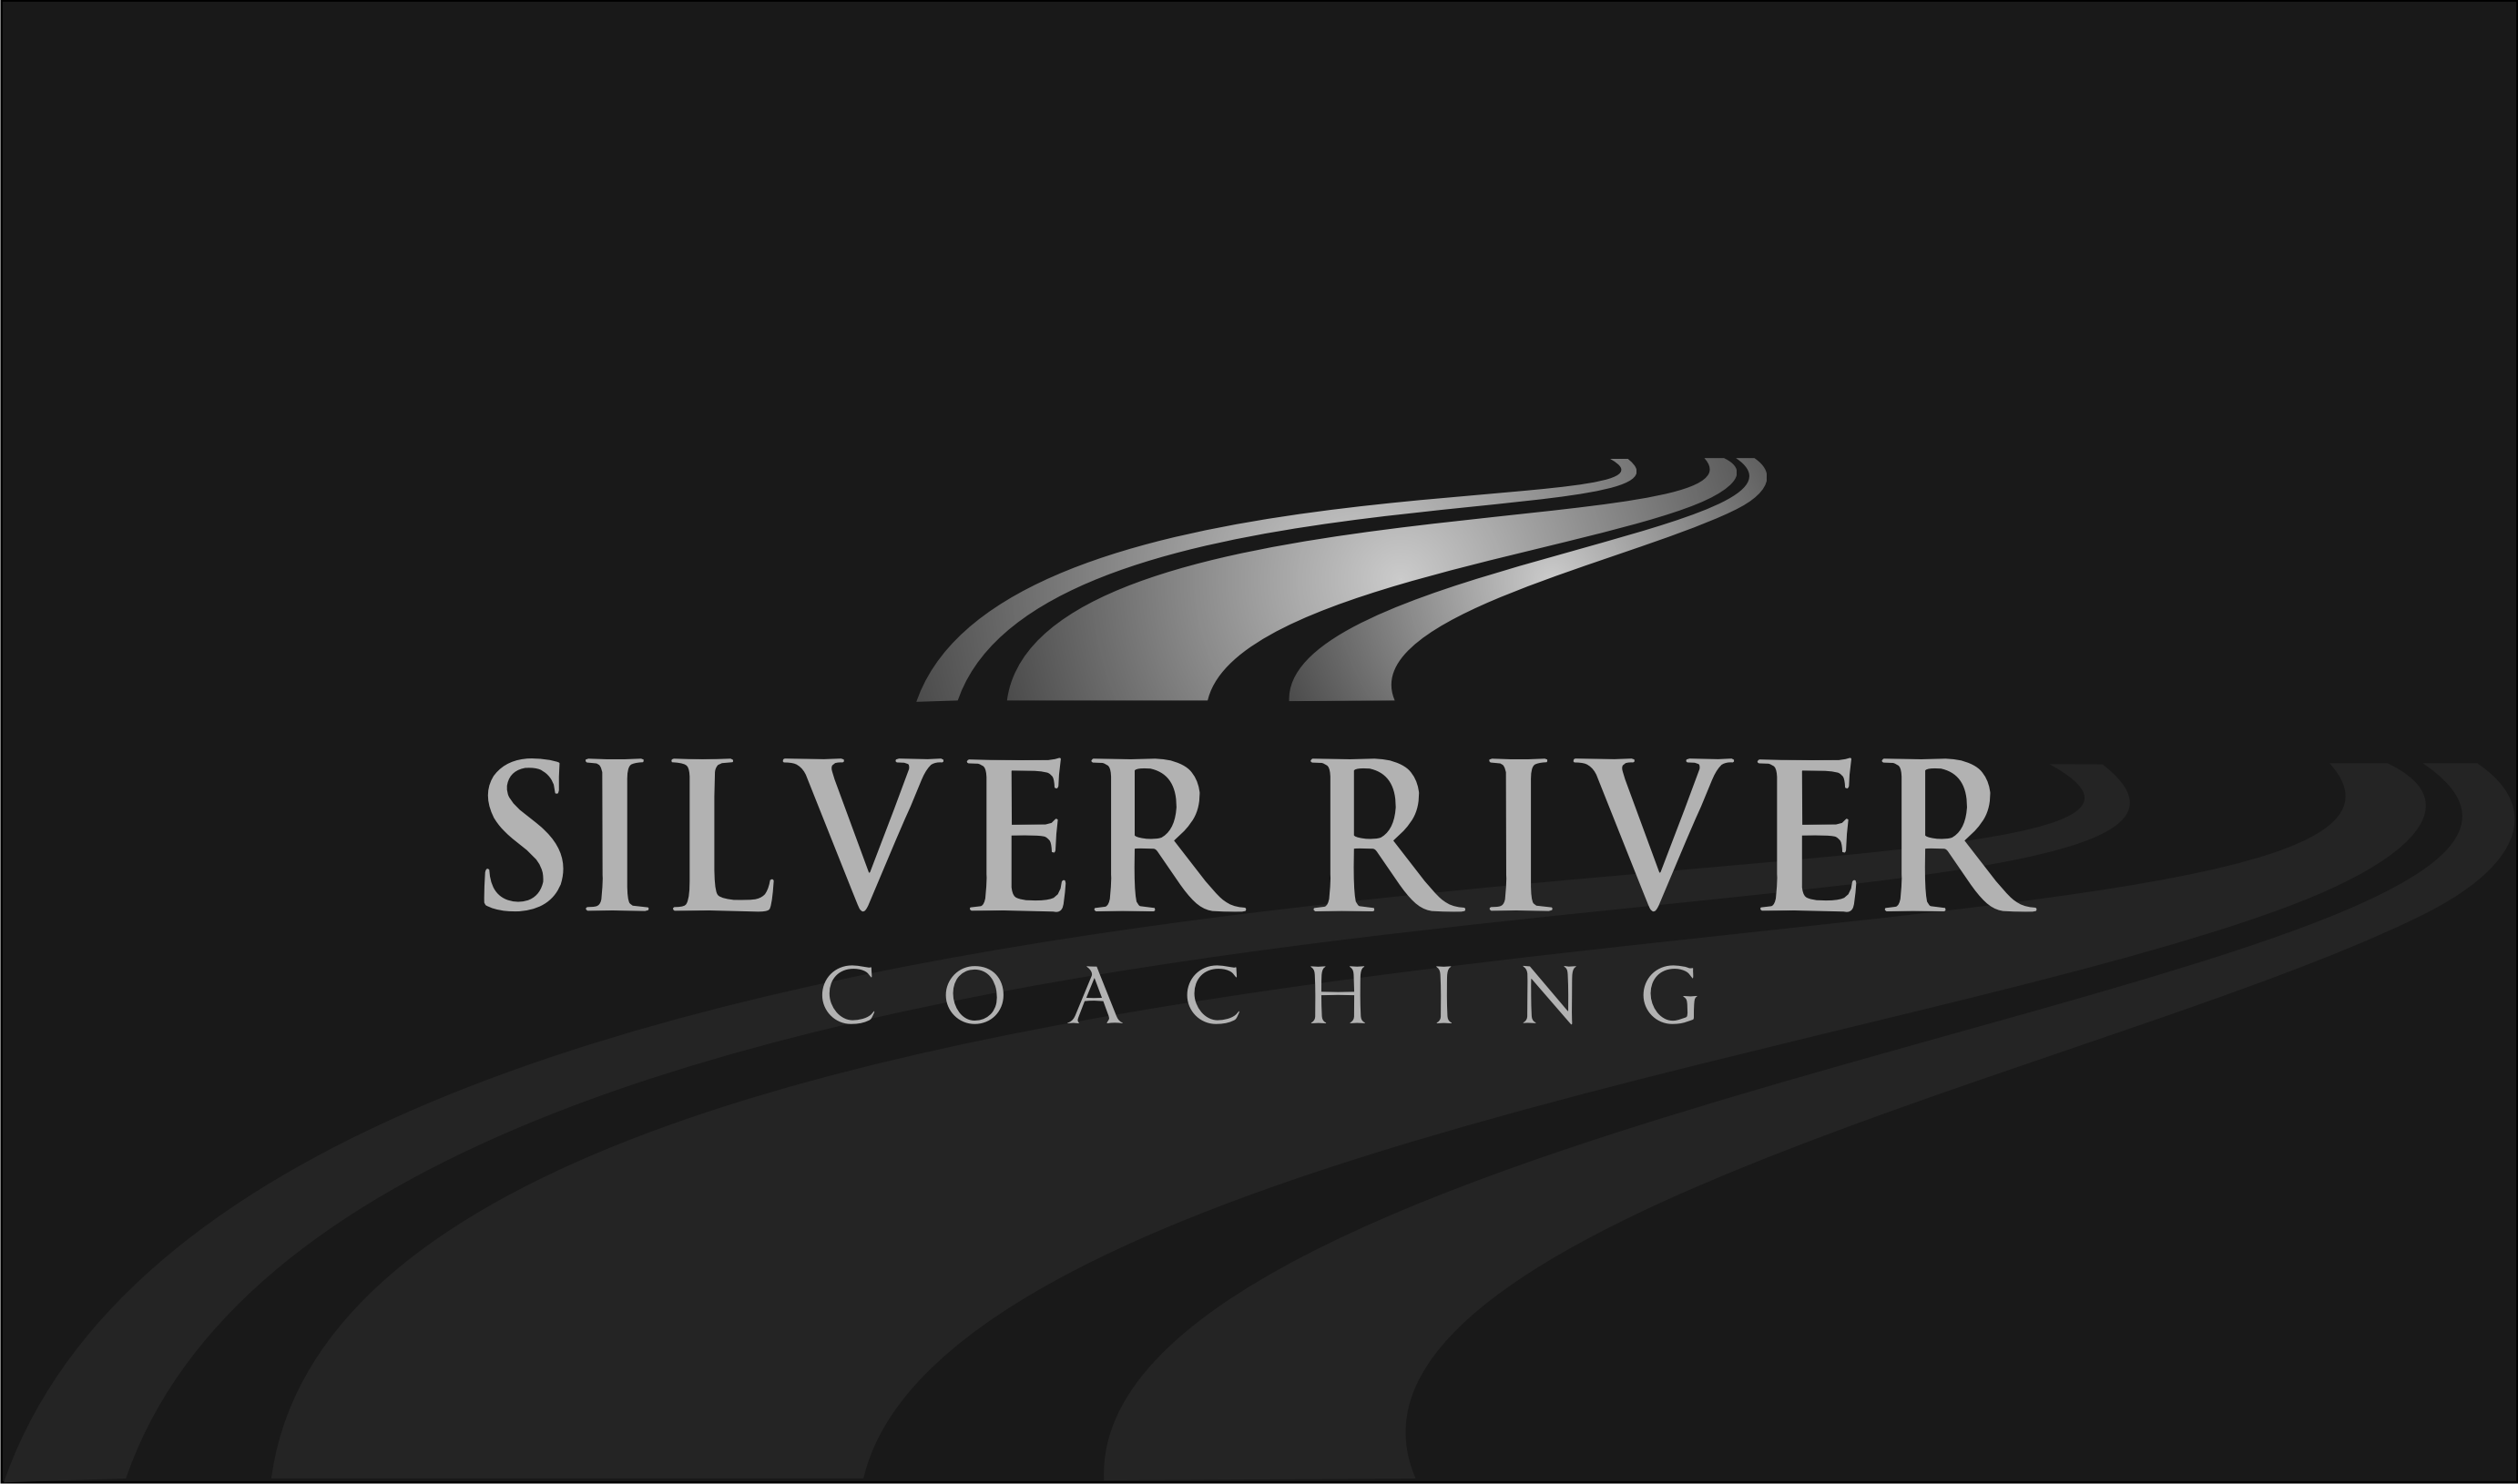 Black and Silver Logo - Logo Design Needed for Exciting New Company Silver River Coaching